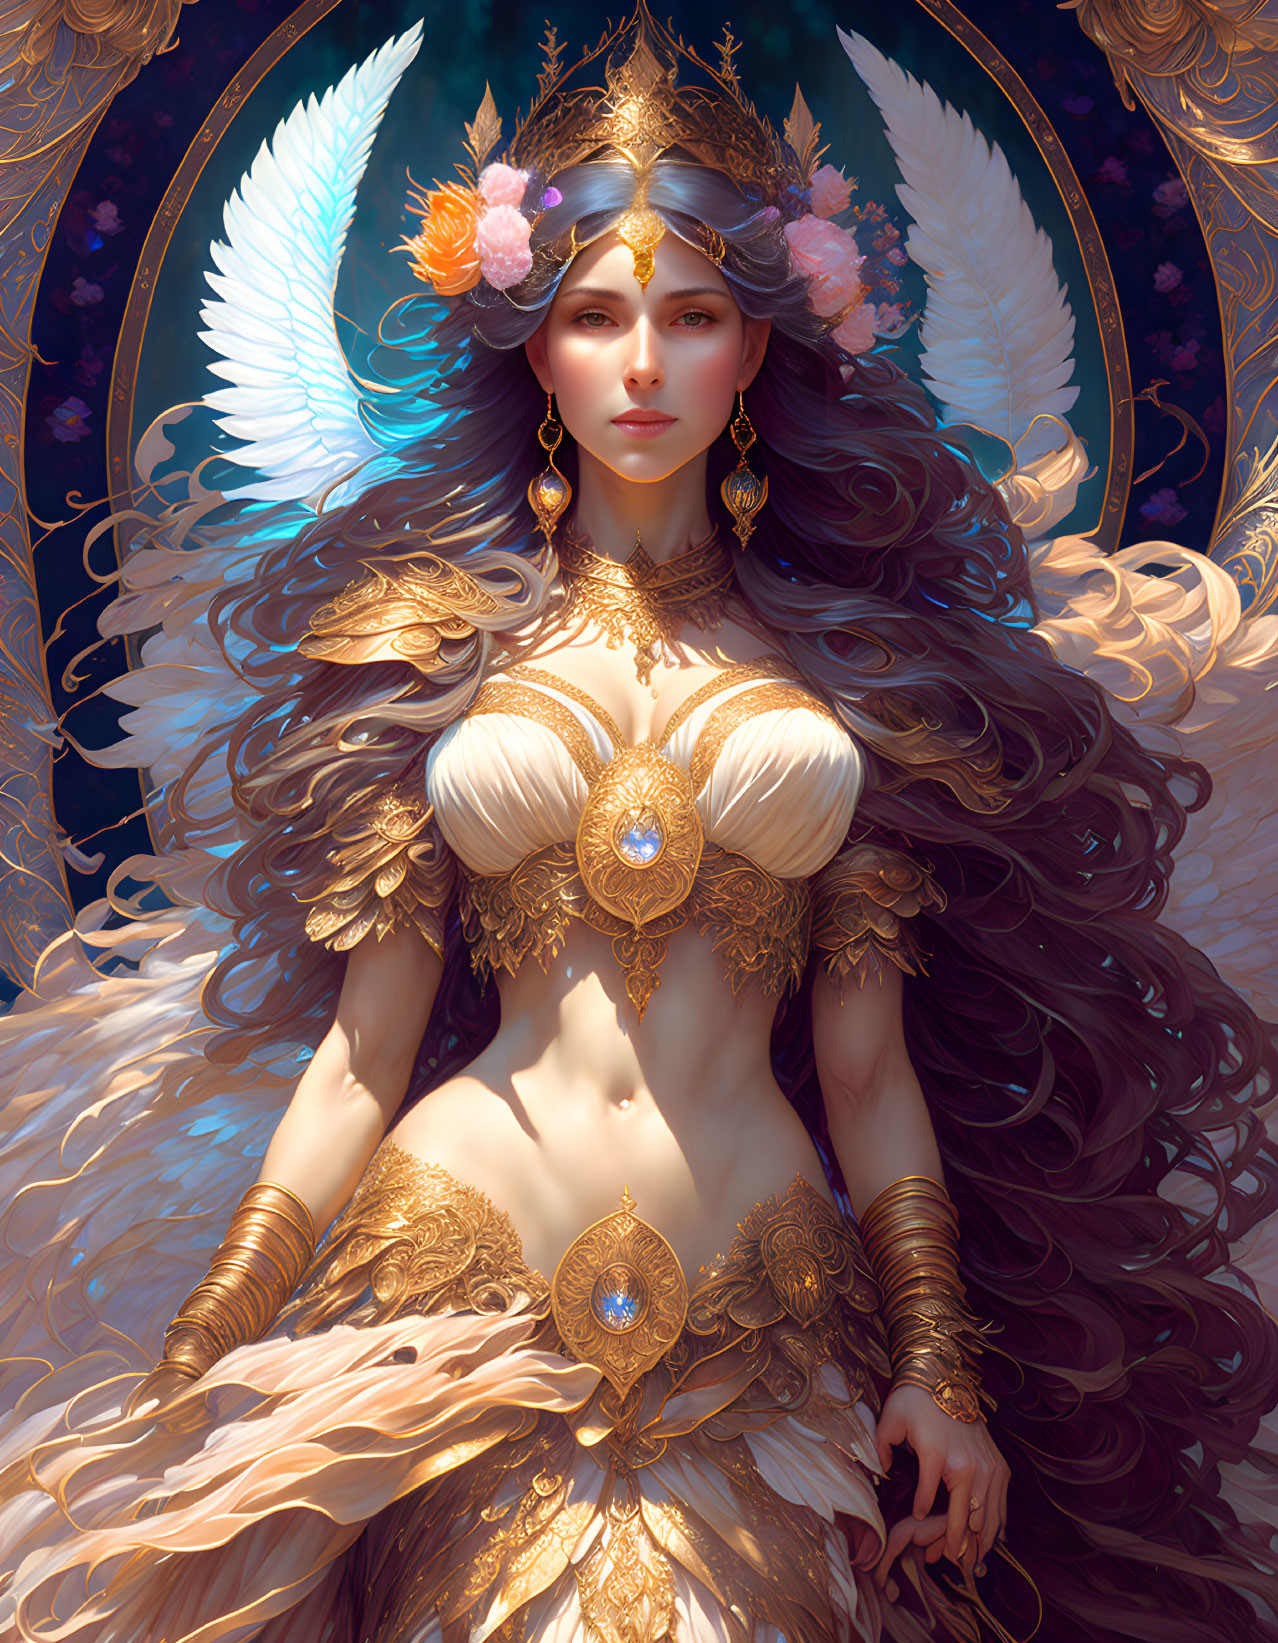 Ethereal figure with angelic wings in golden armor and celestial motif